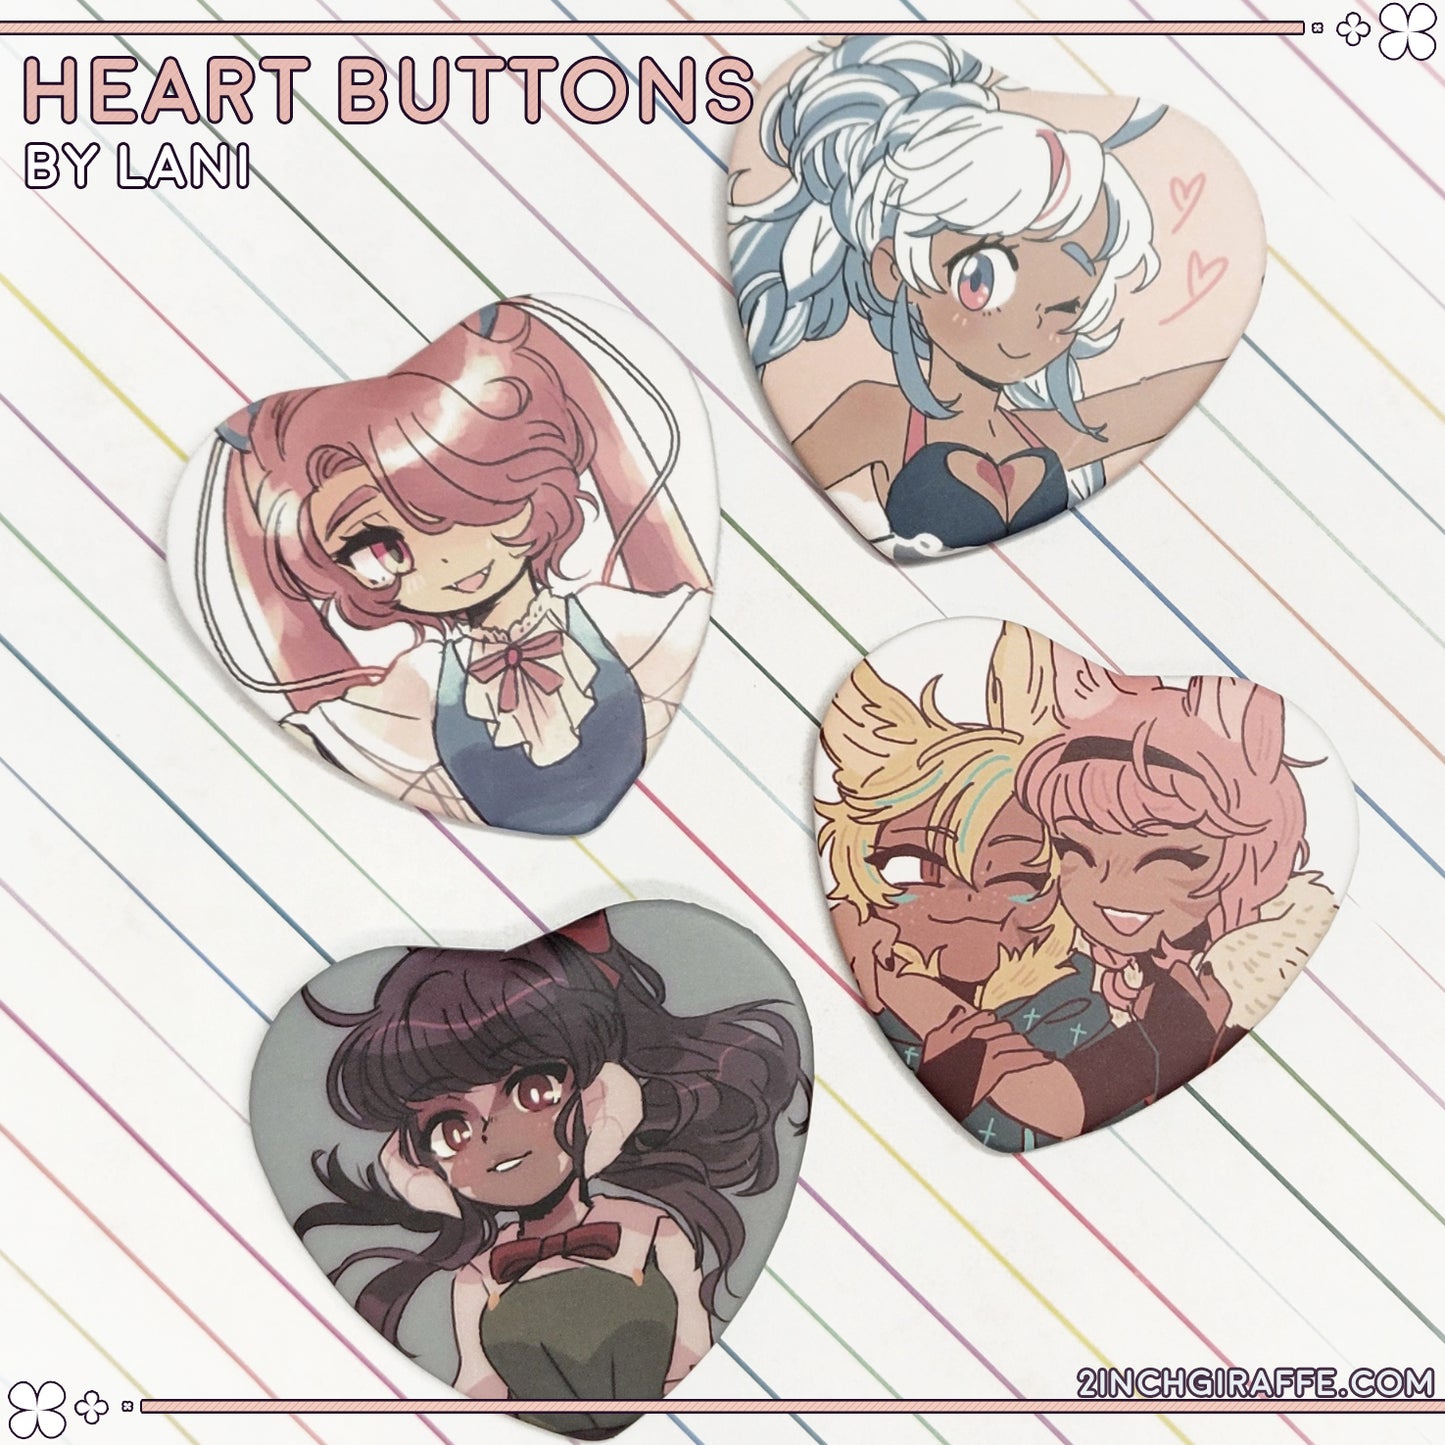 Original Buttons By Lani